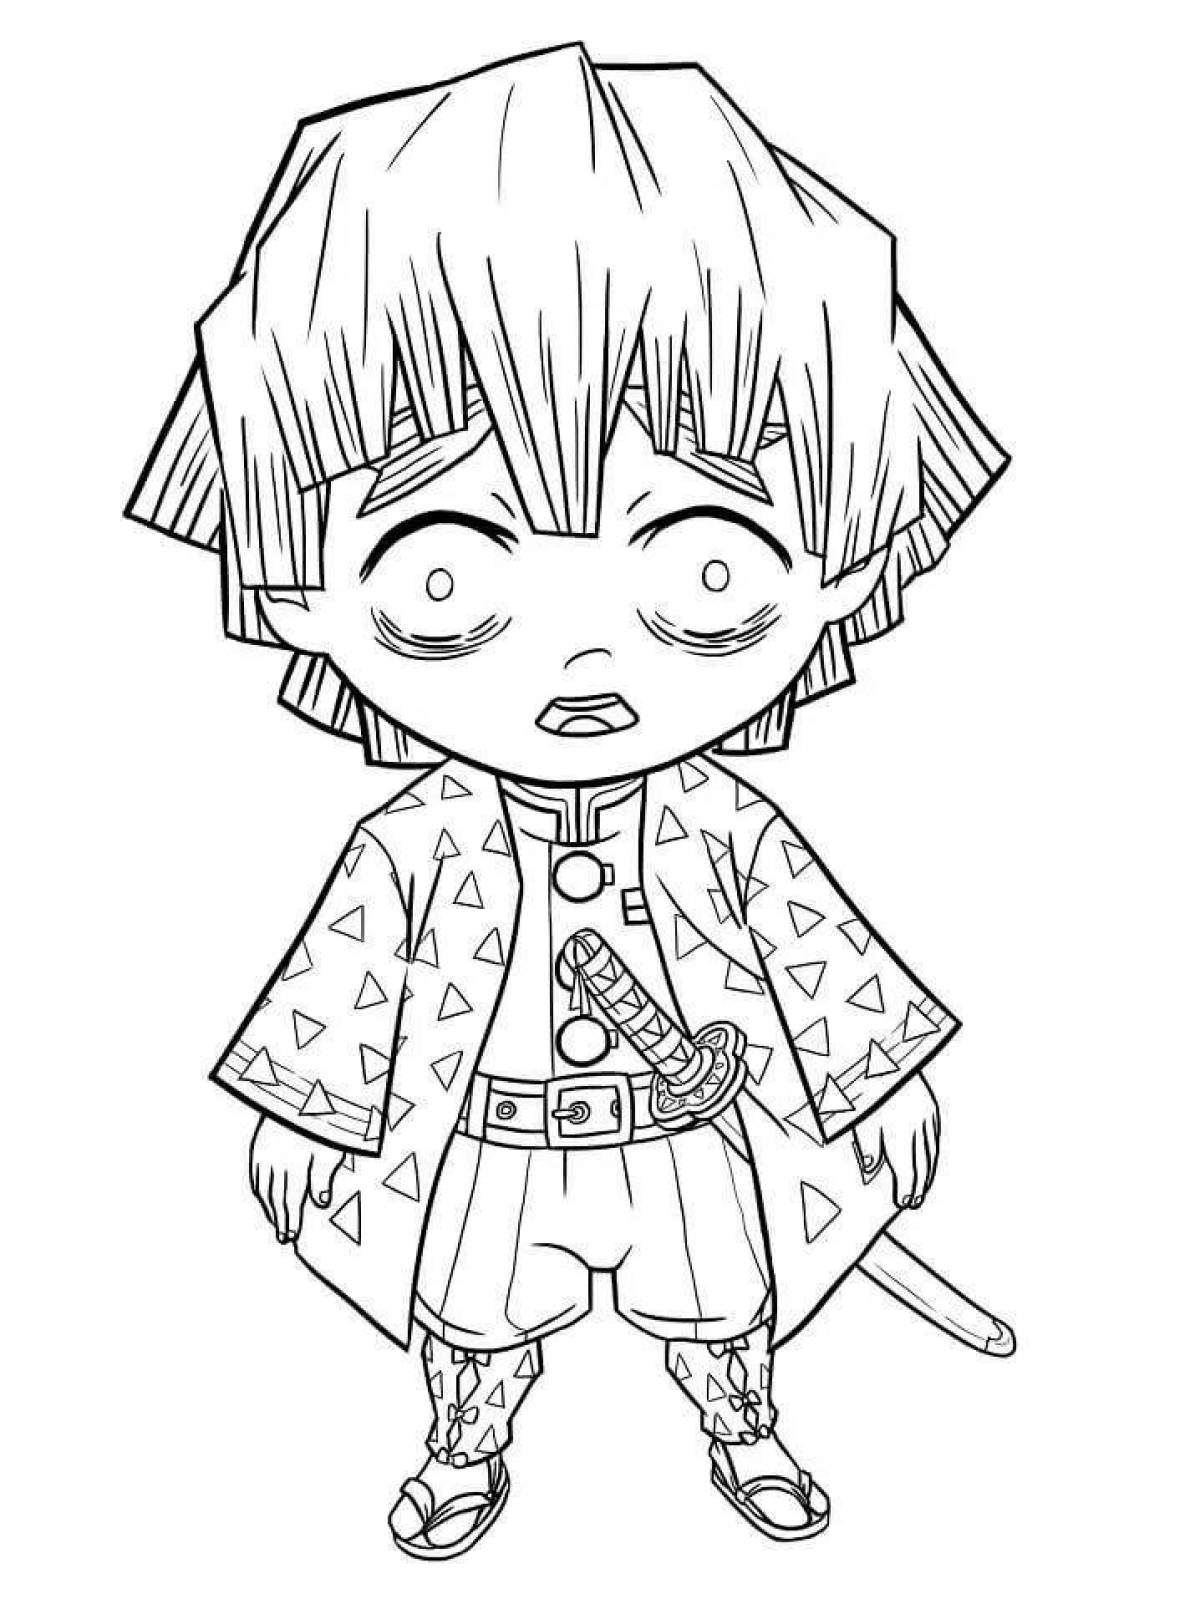 Gorgeous chibi demon cleaver coloring page